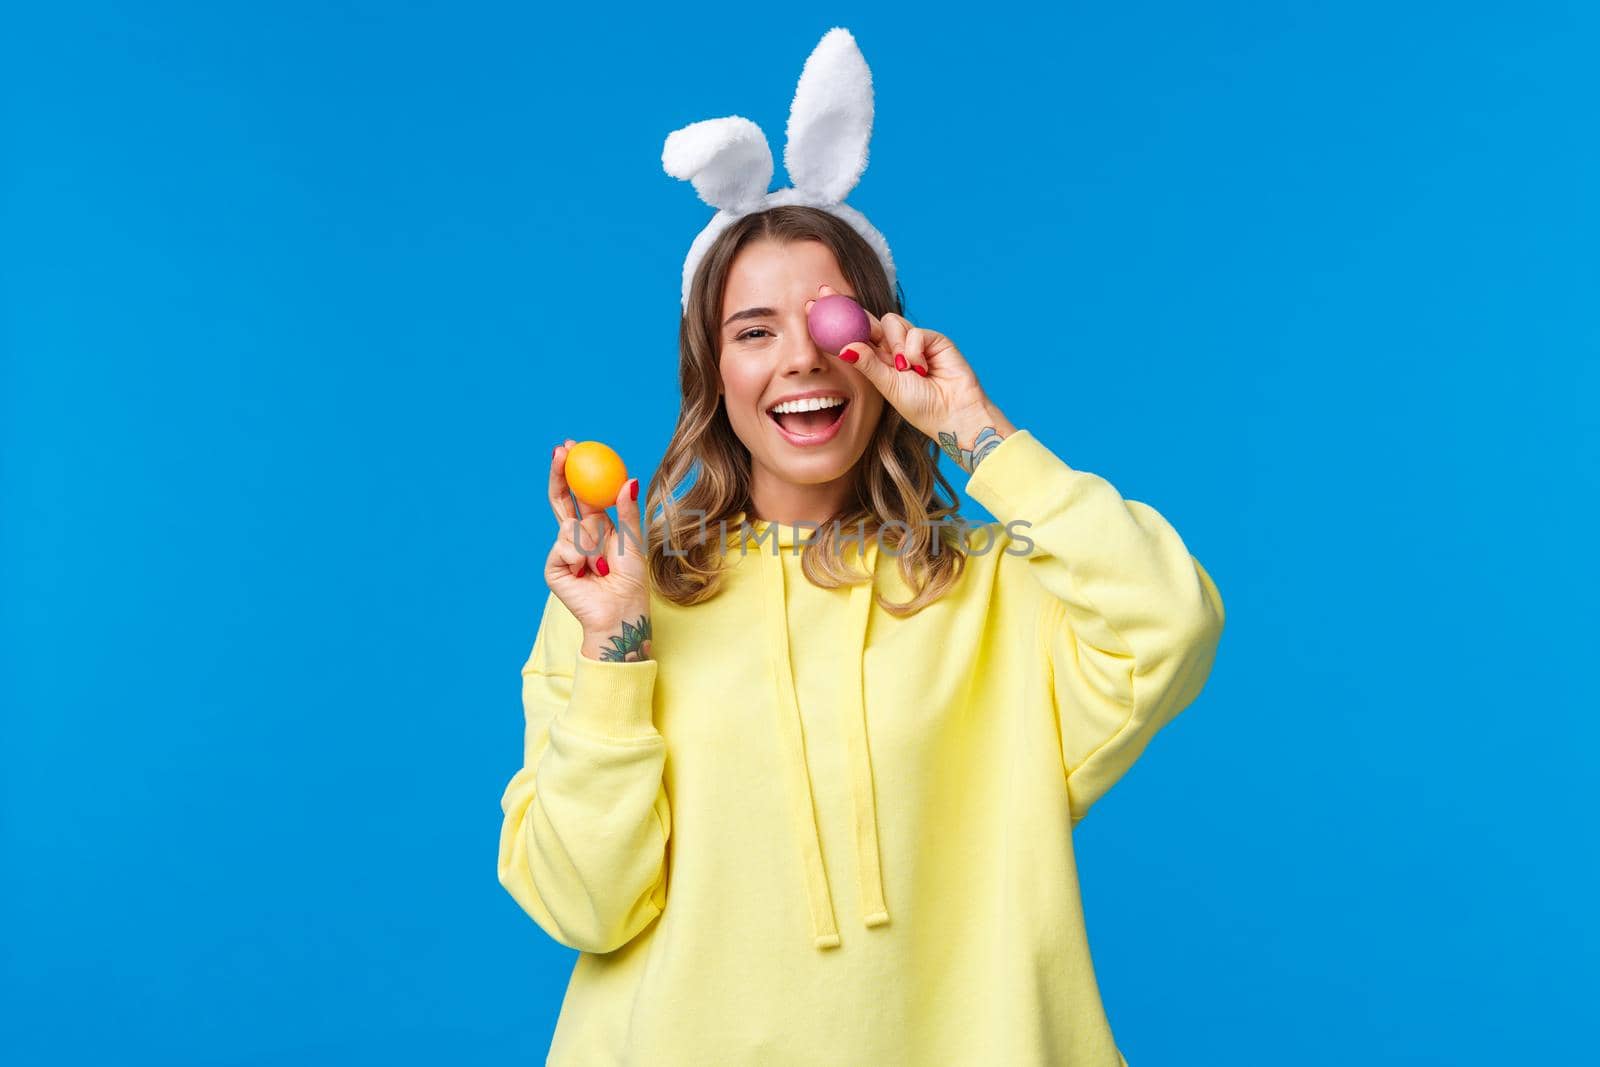 Holidays, traditions and celebration concept. Happy cheerful young pretty female celebrating Easter day, showing two painted eggs and laughing, wearing cute rabbit ears, blue background.